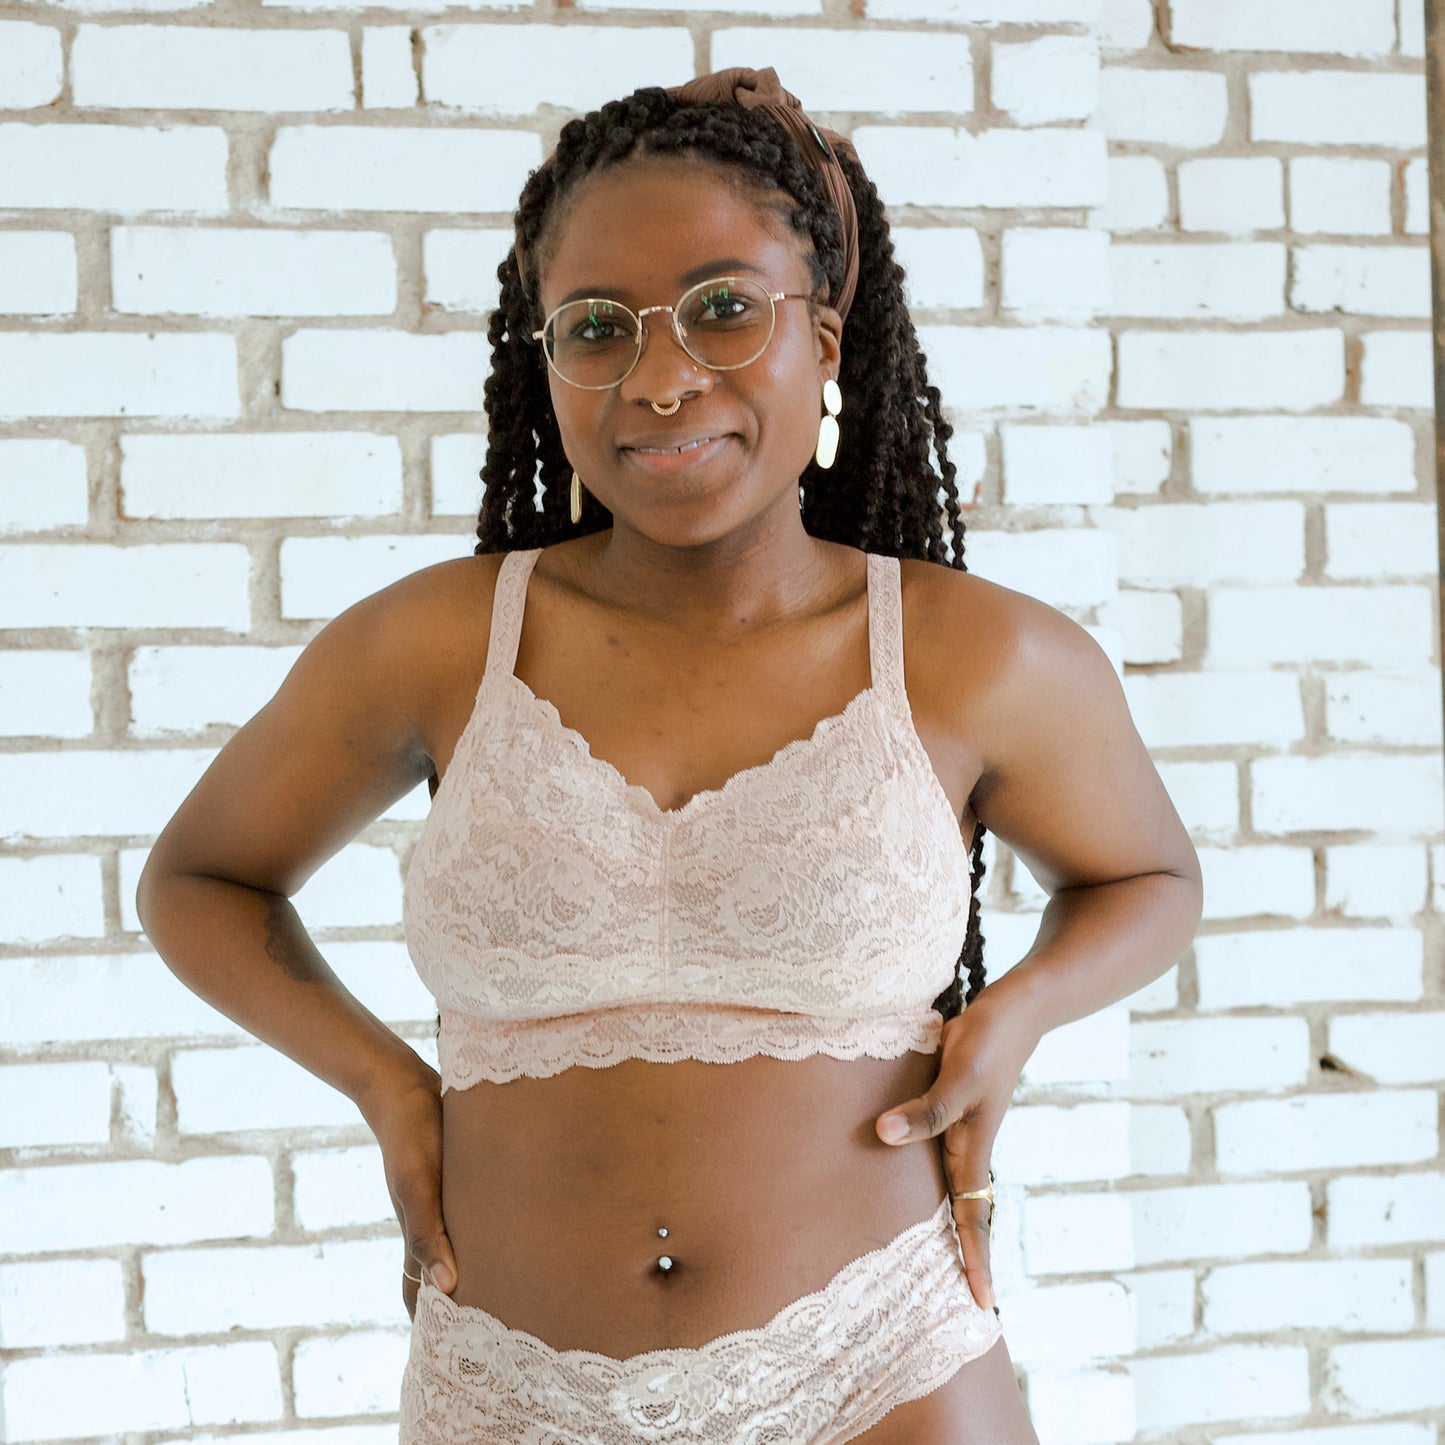 Never Curvy Sweetie Bralette NEVER1310 – The Full Cup